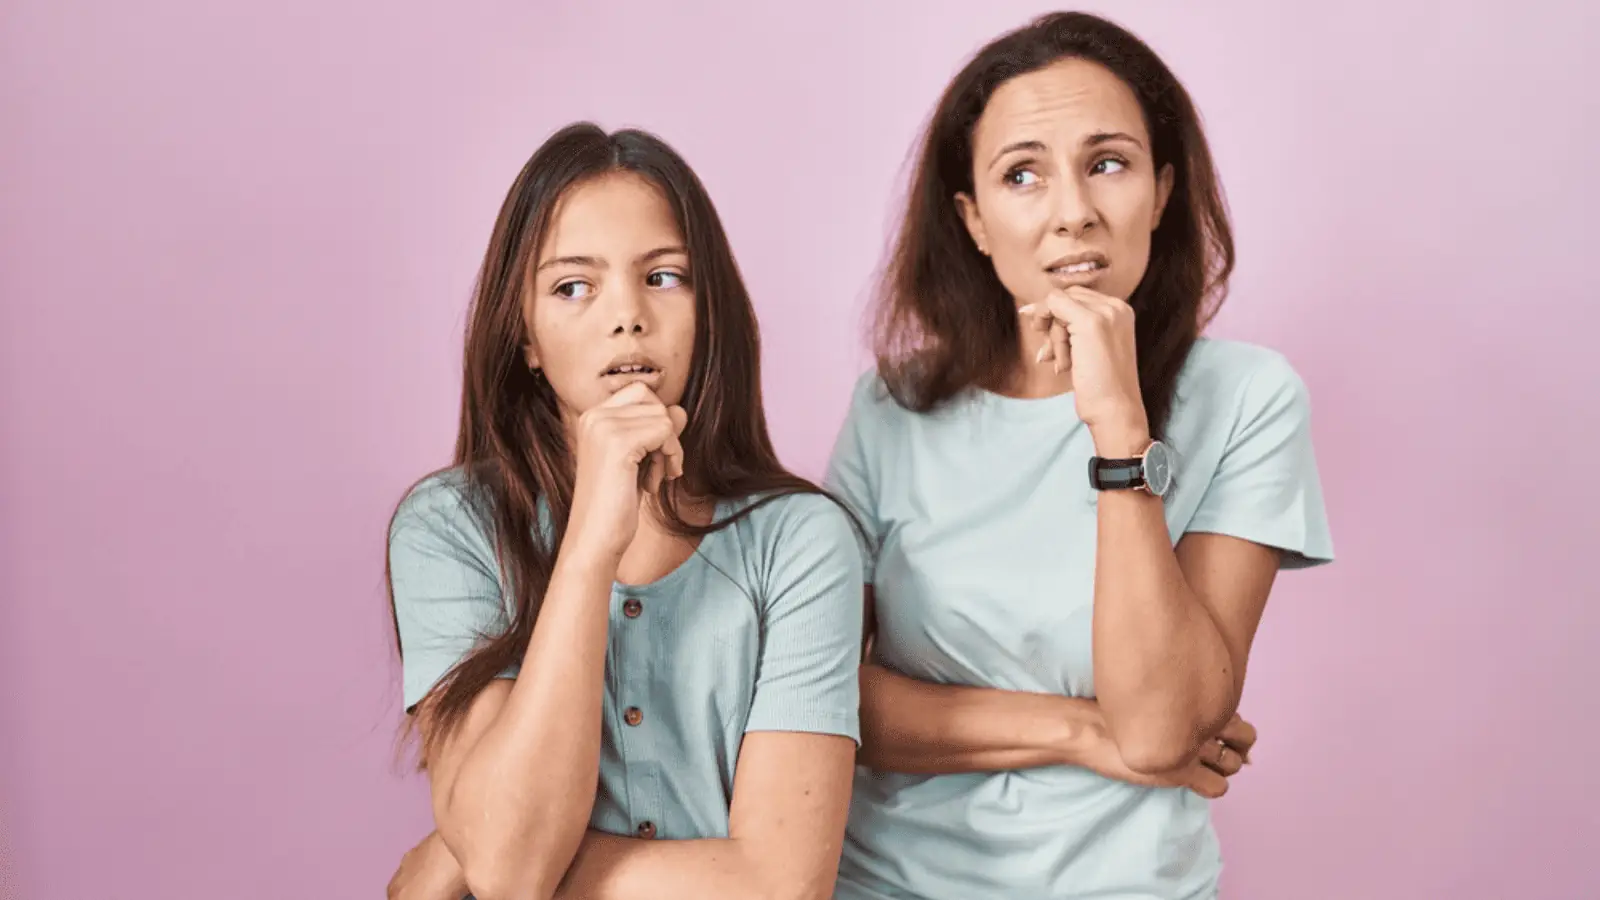 mom and daughter confused thinking